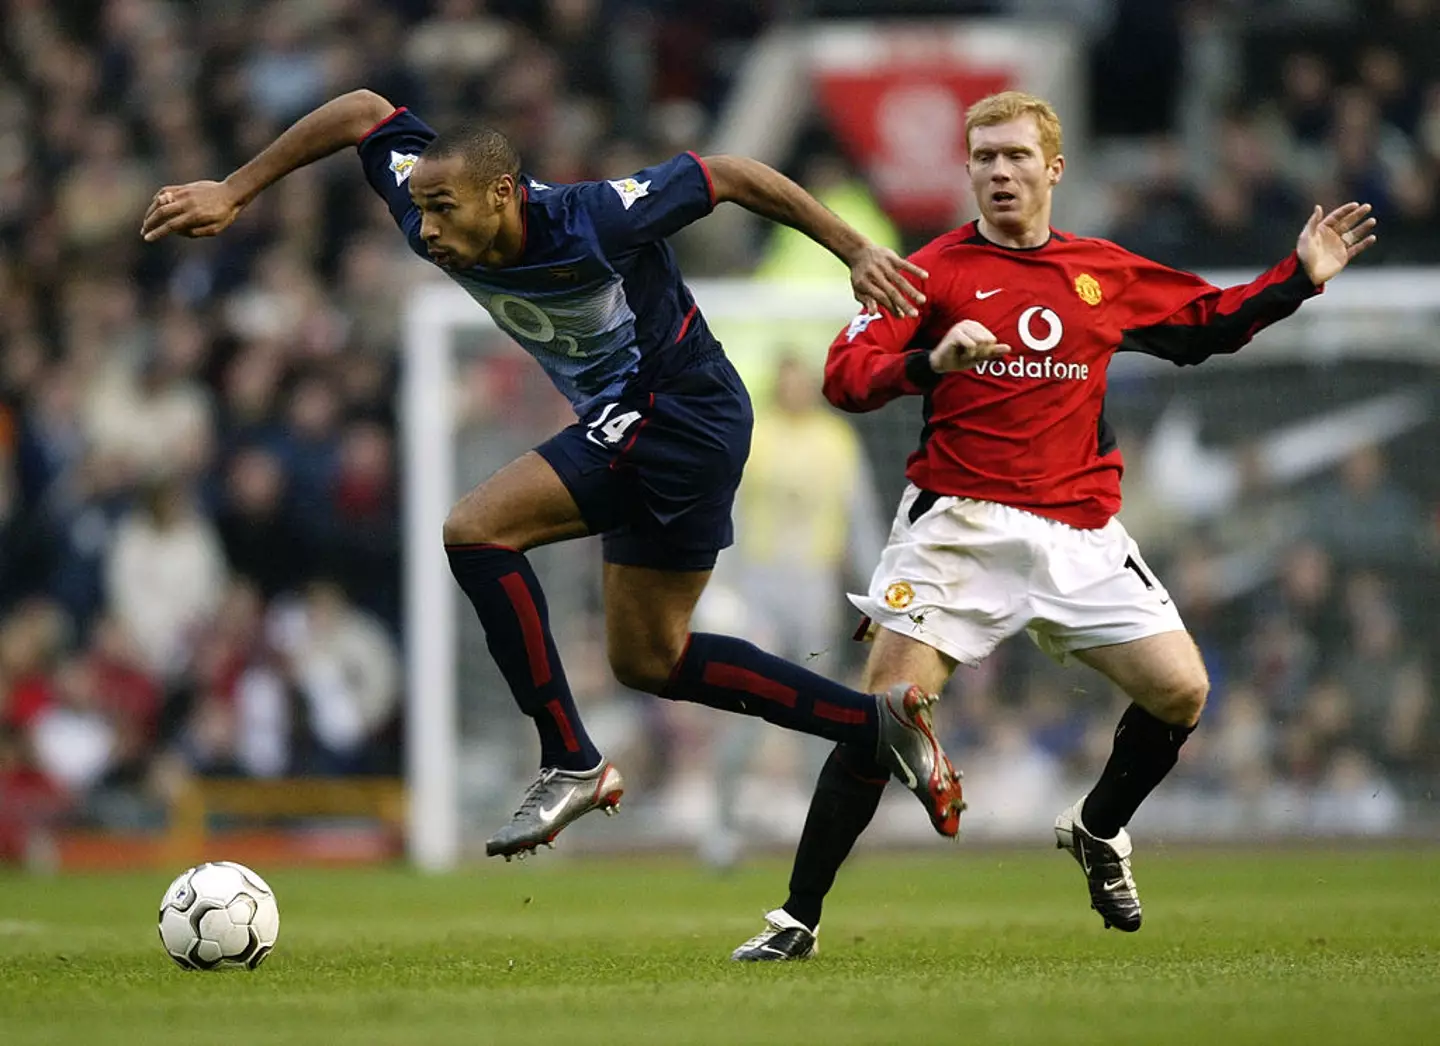 Thierry Henry and Paul Scholes battle for the ball during a game between Man Utd and Arsenal in 2002 (